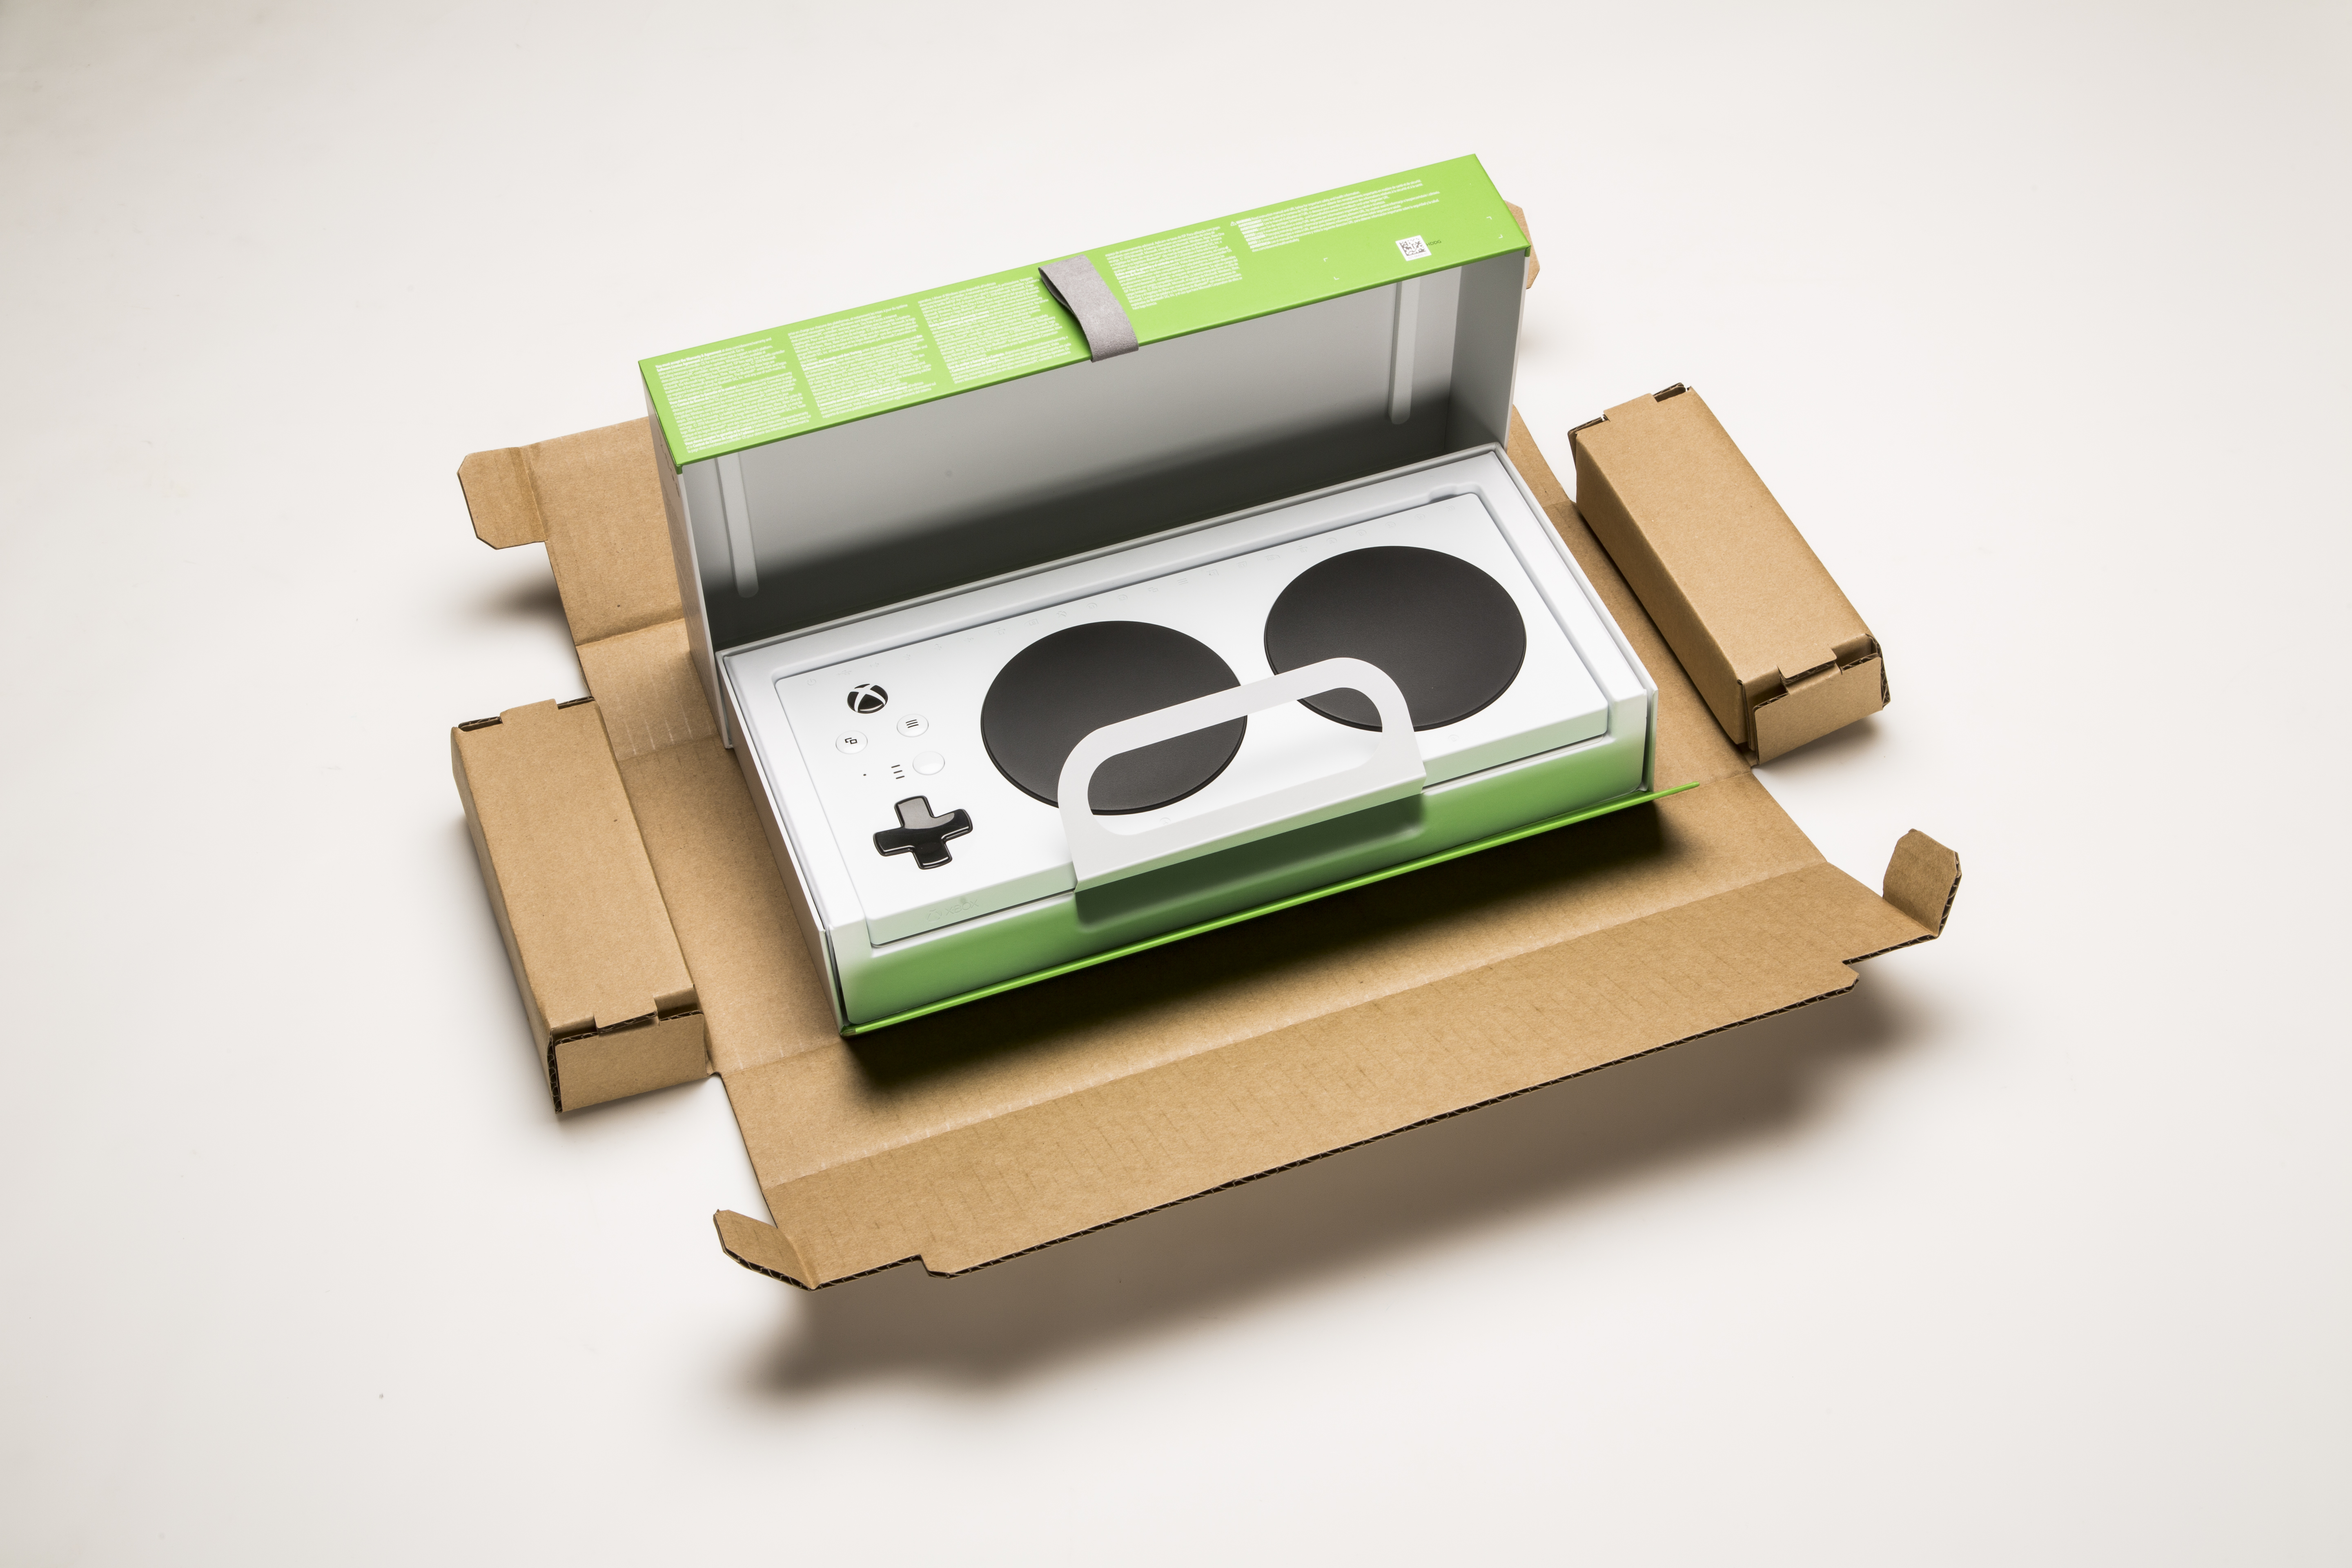 The new Xbox Adaptive Controller, surrounded by the open box designed specifically to accommodate gamers with limited mobility